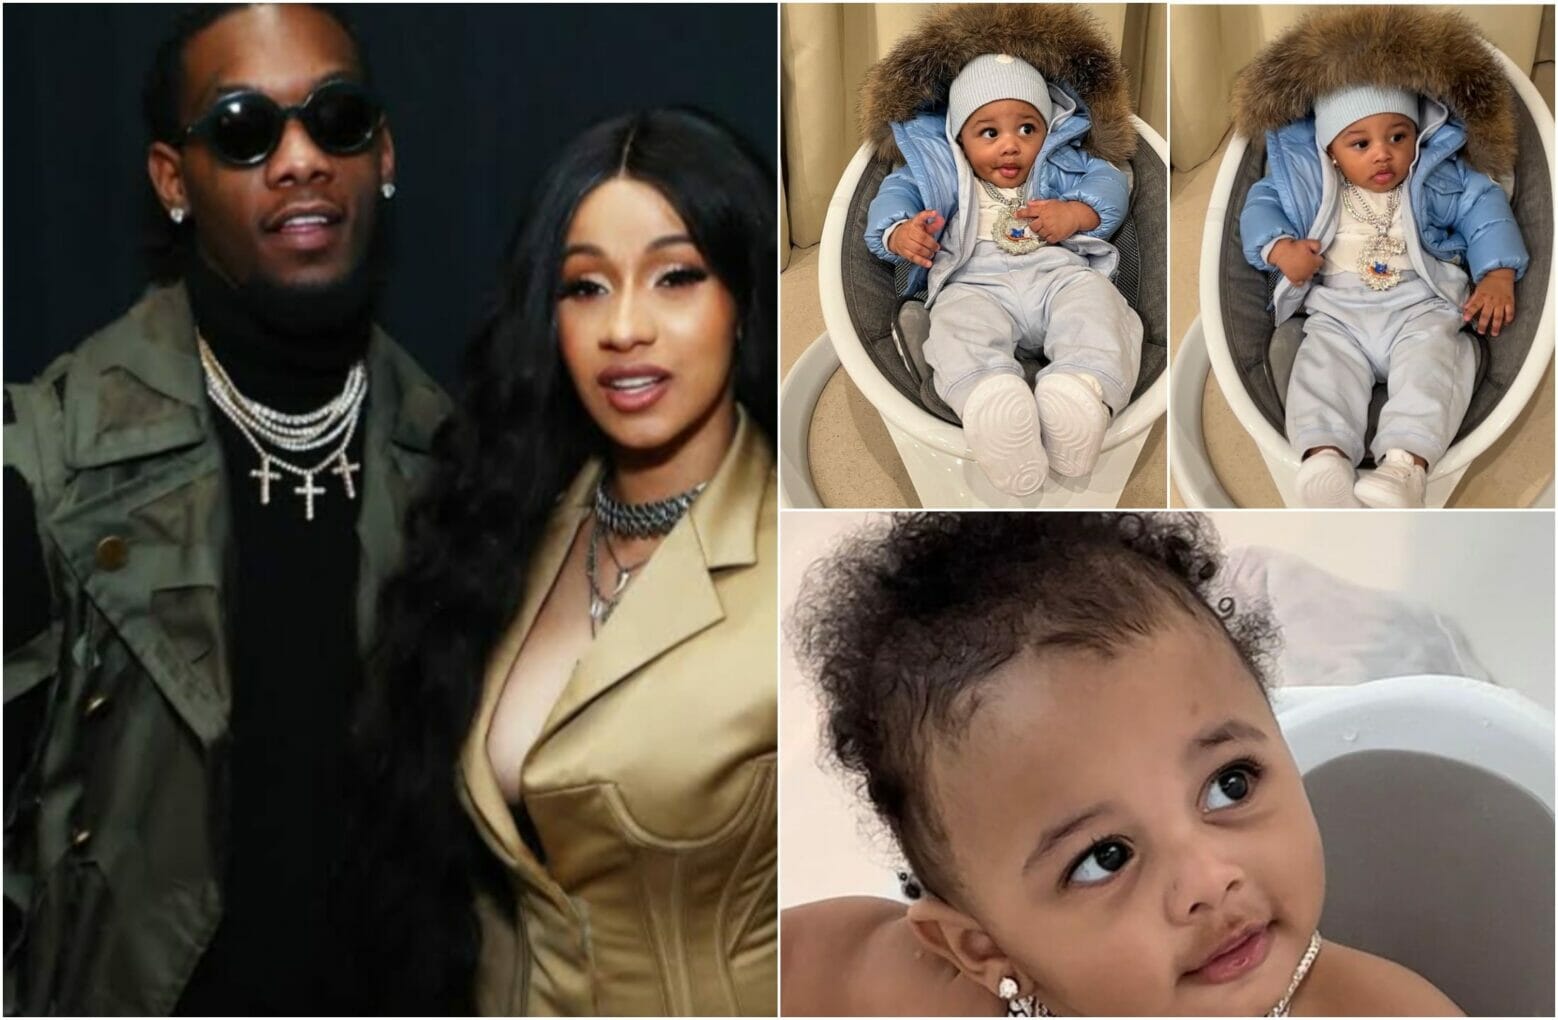 Cardi B and Offset reveals son's face and name